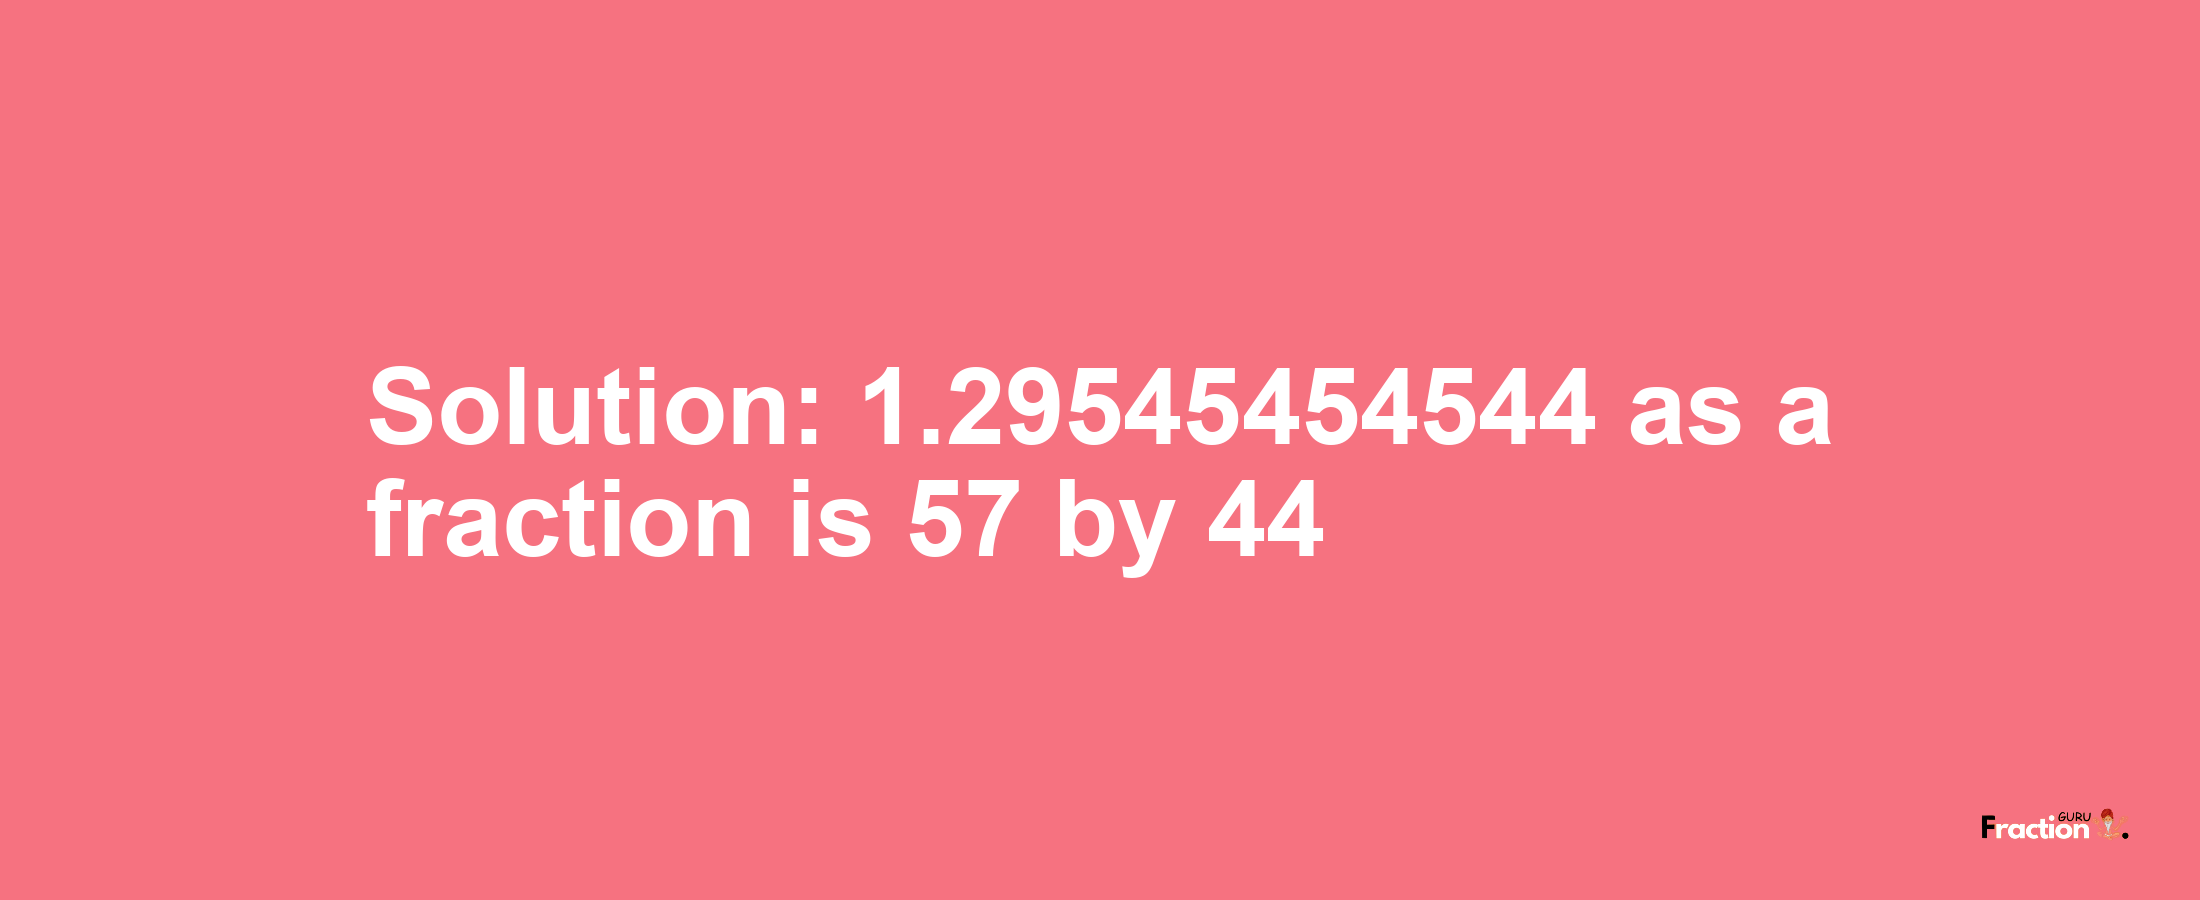 Solution:1.29545454544 as a fraction is 57/44